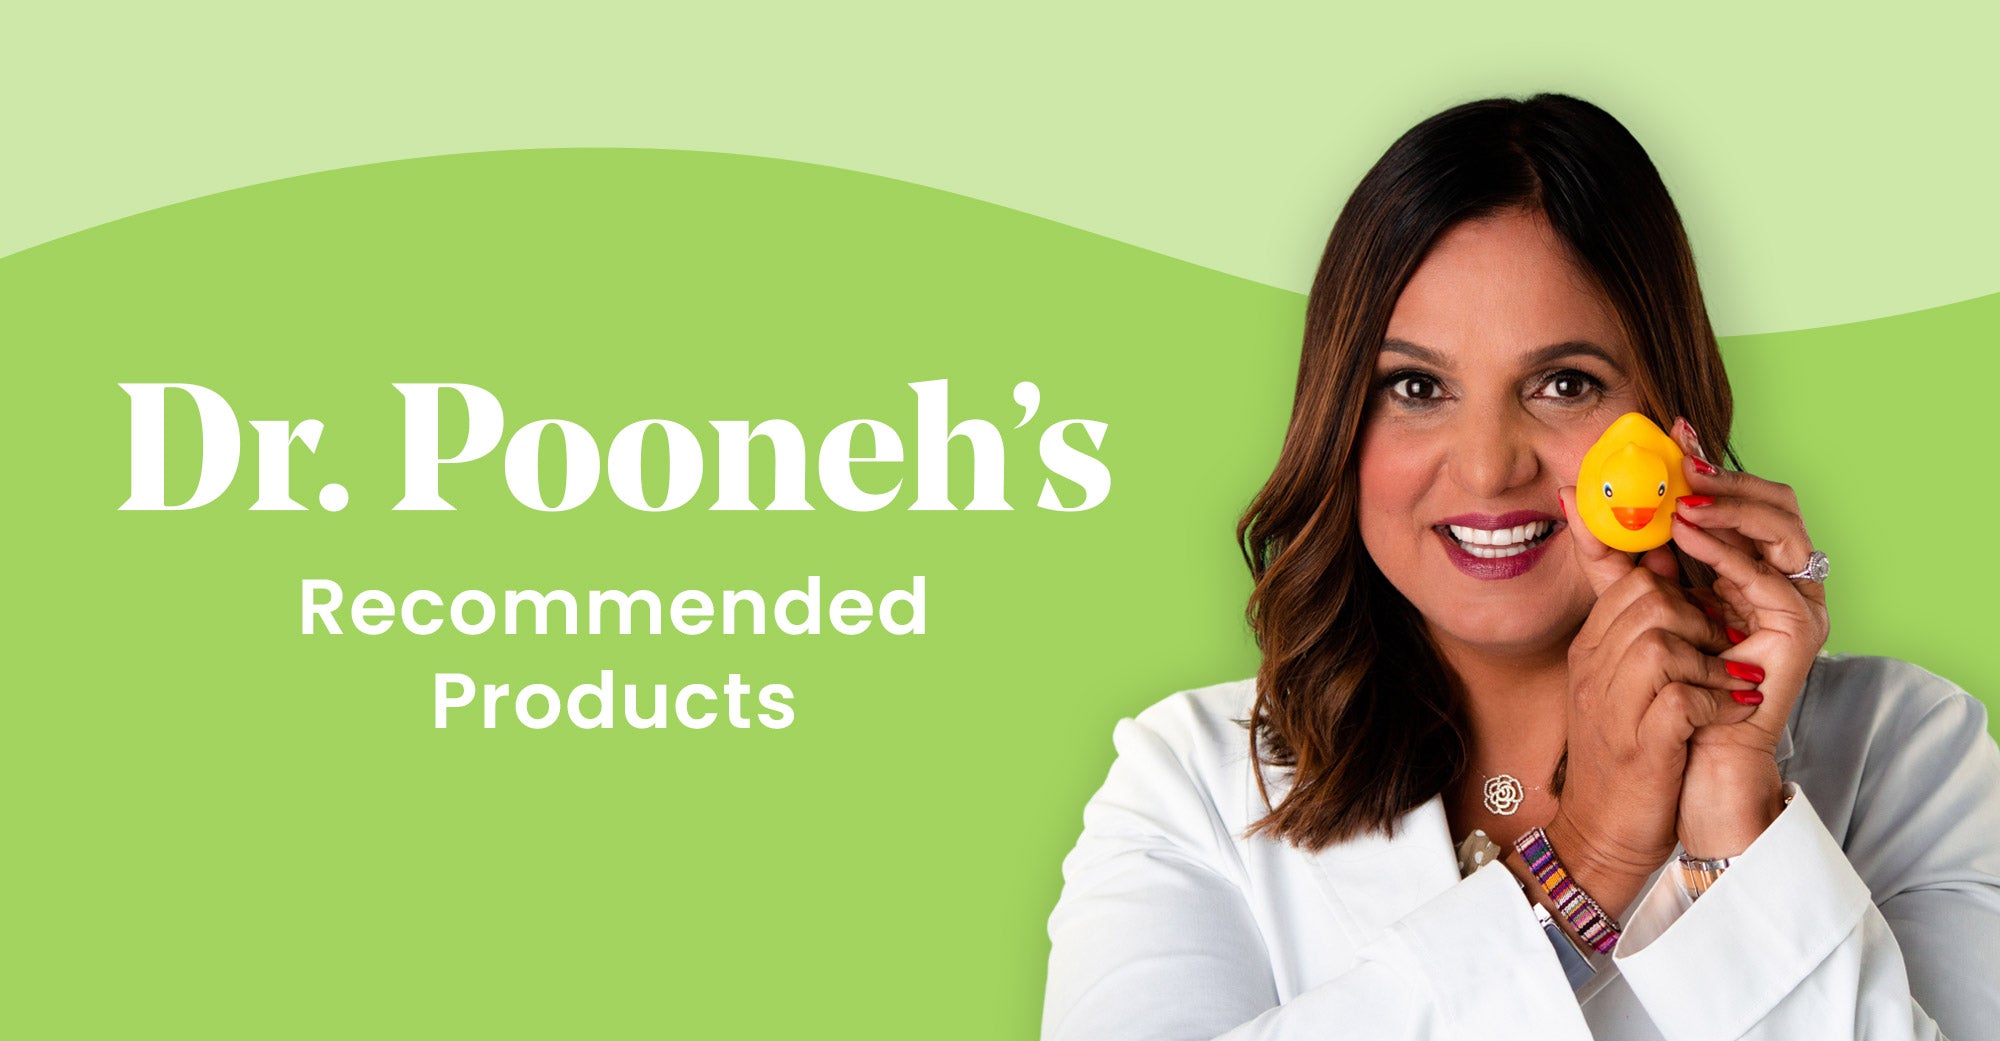 Dr. Pooneh's Recommended Products